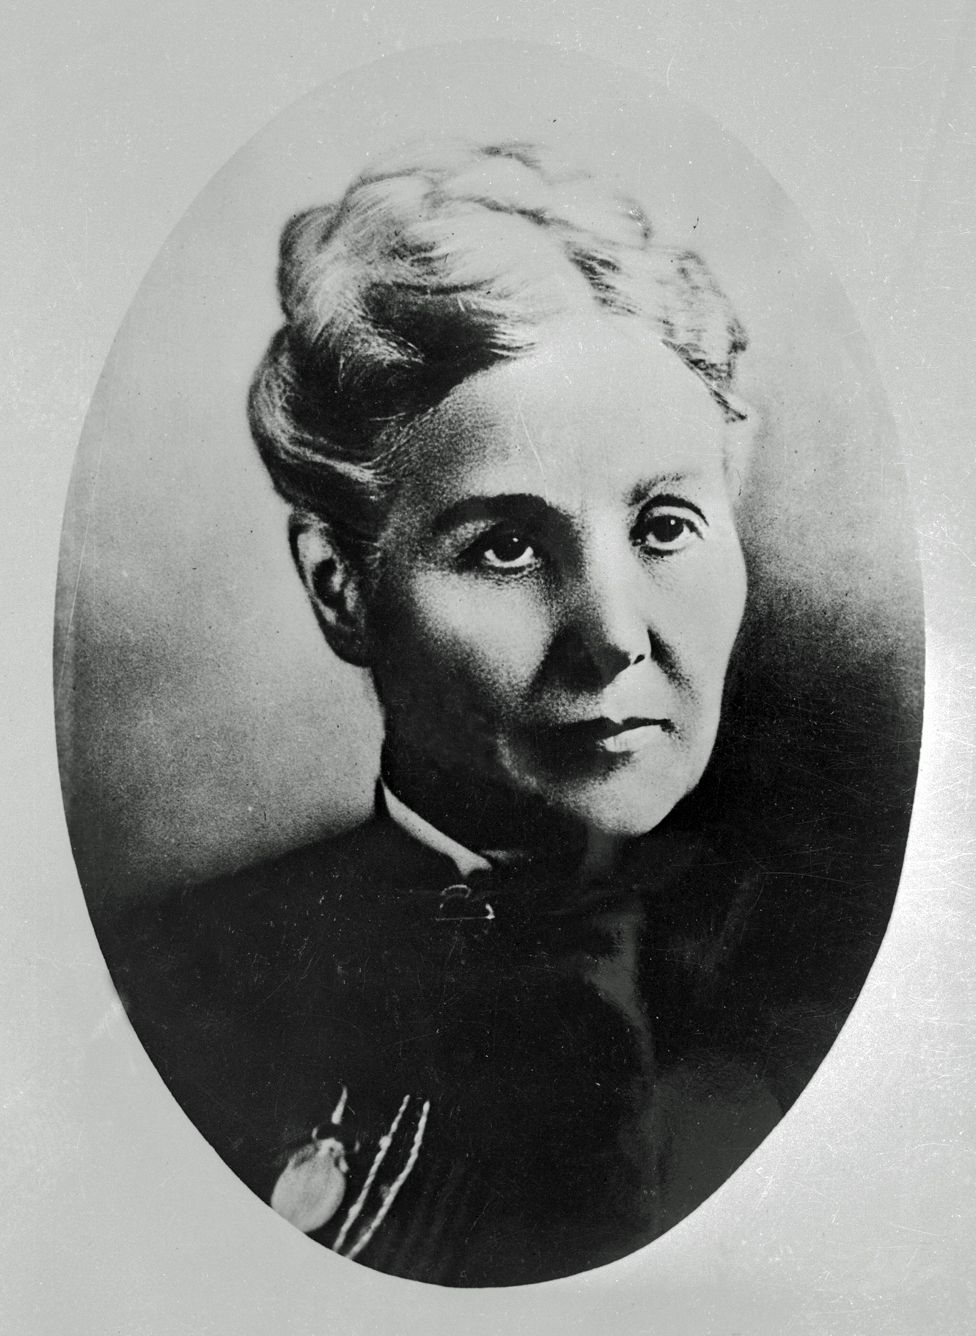 Mother of Anna M. Jarvis, Founder of Mother's Day - original caption: This is Anna Jarvis, mother of Miss Anna M. Jarvis who campaigned to have the second Sunday in May set aside each year as a day of honour to the mothers of the nation.